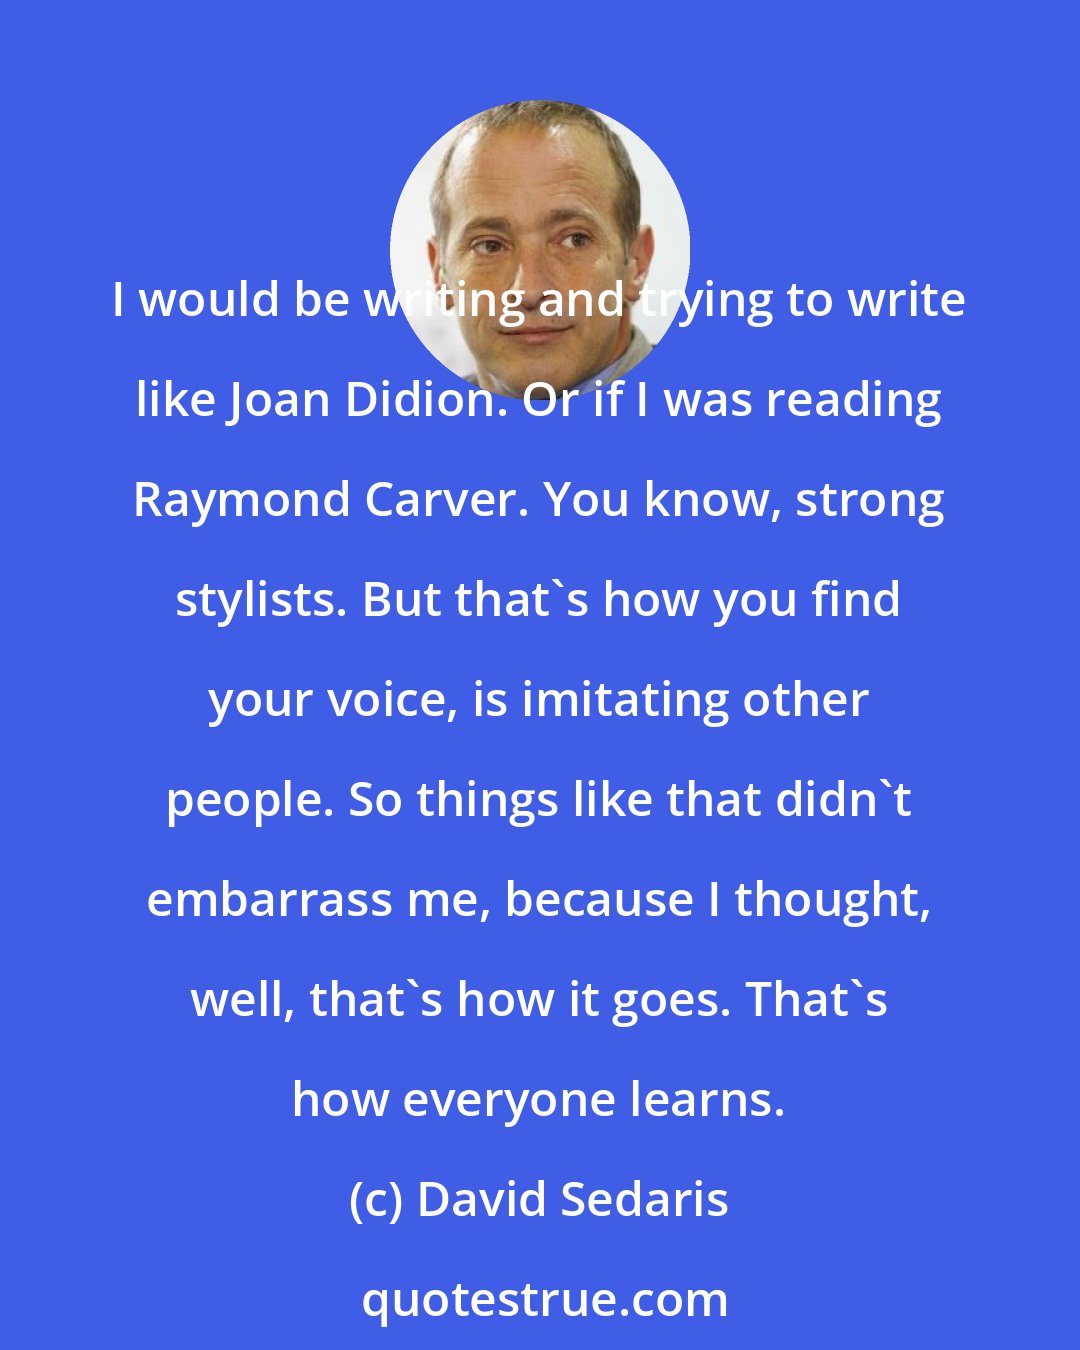 David Sedaris: I would be writing and trying to write like Joan Didion. Or if I was reading Raymond Carver. You know, strong stylists. But that's how you find your voice, is imitating other people. So things like that didn't embarrass me, because I thought, well, that's how it goes. That's how everyone learns.